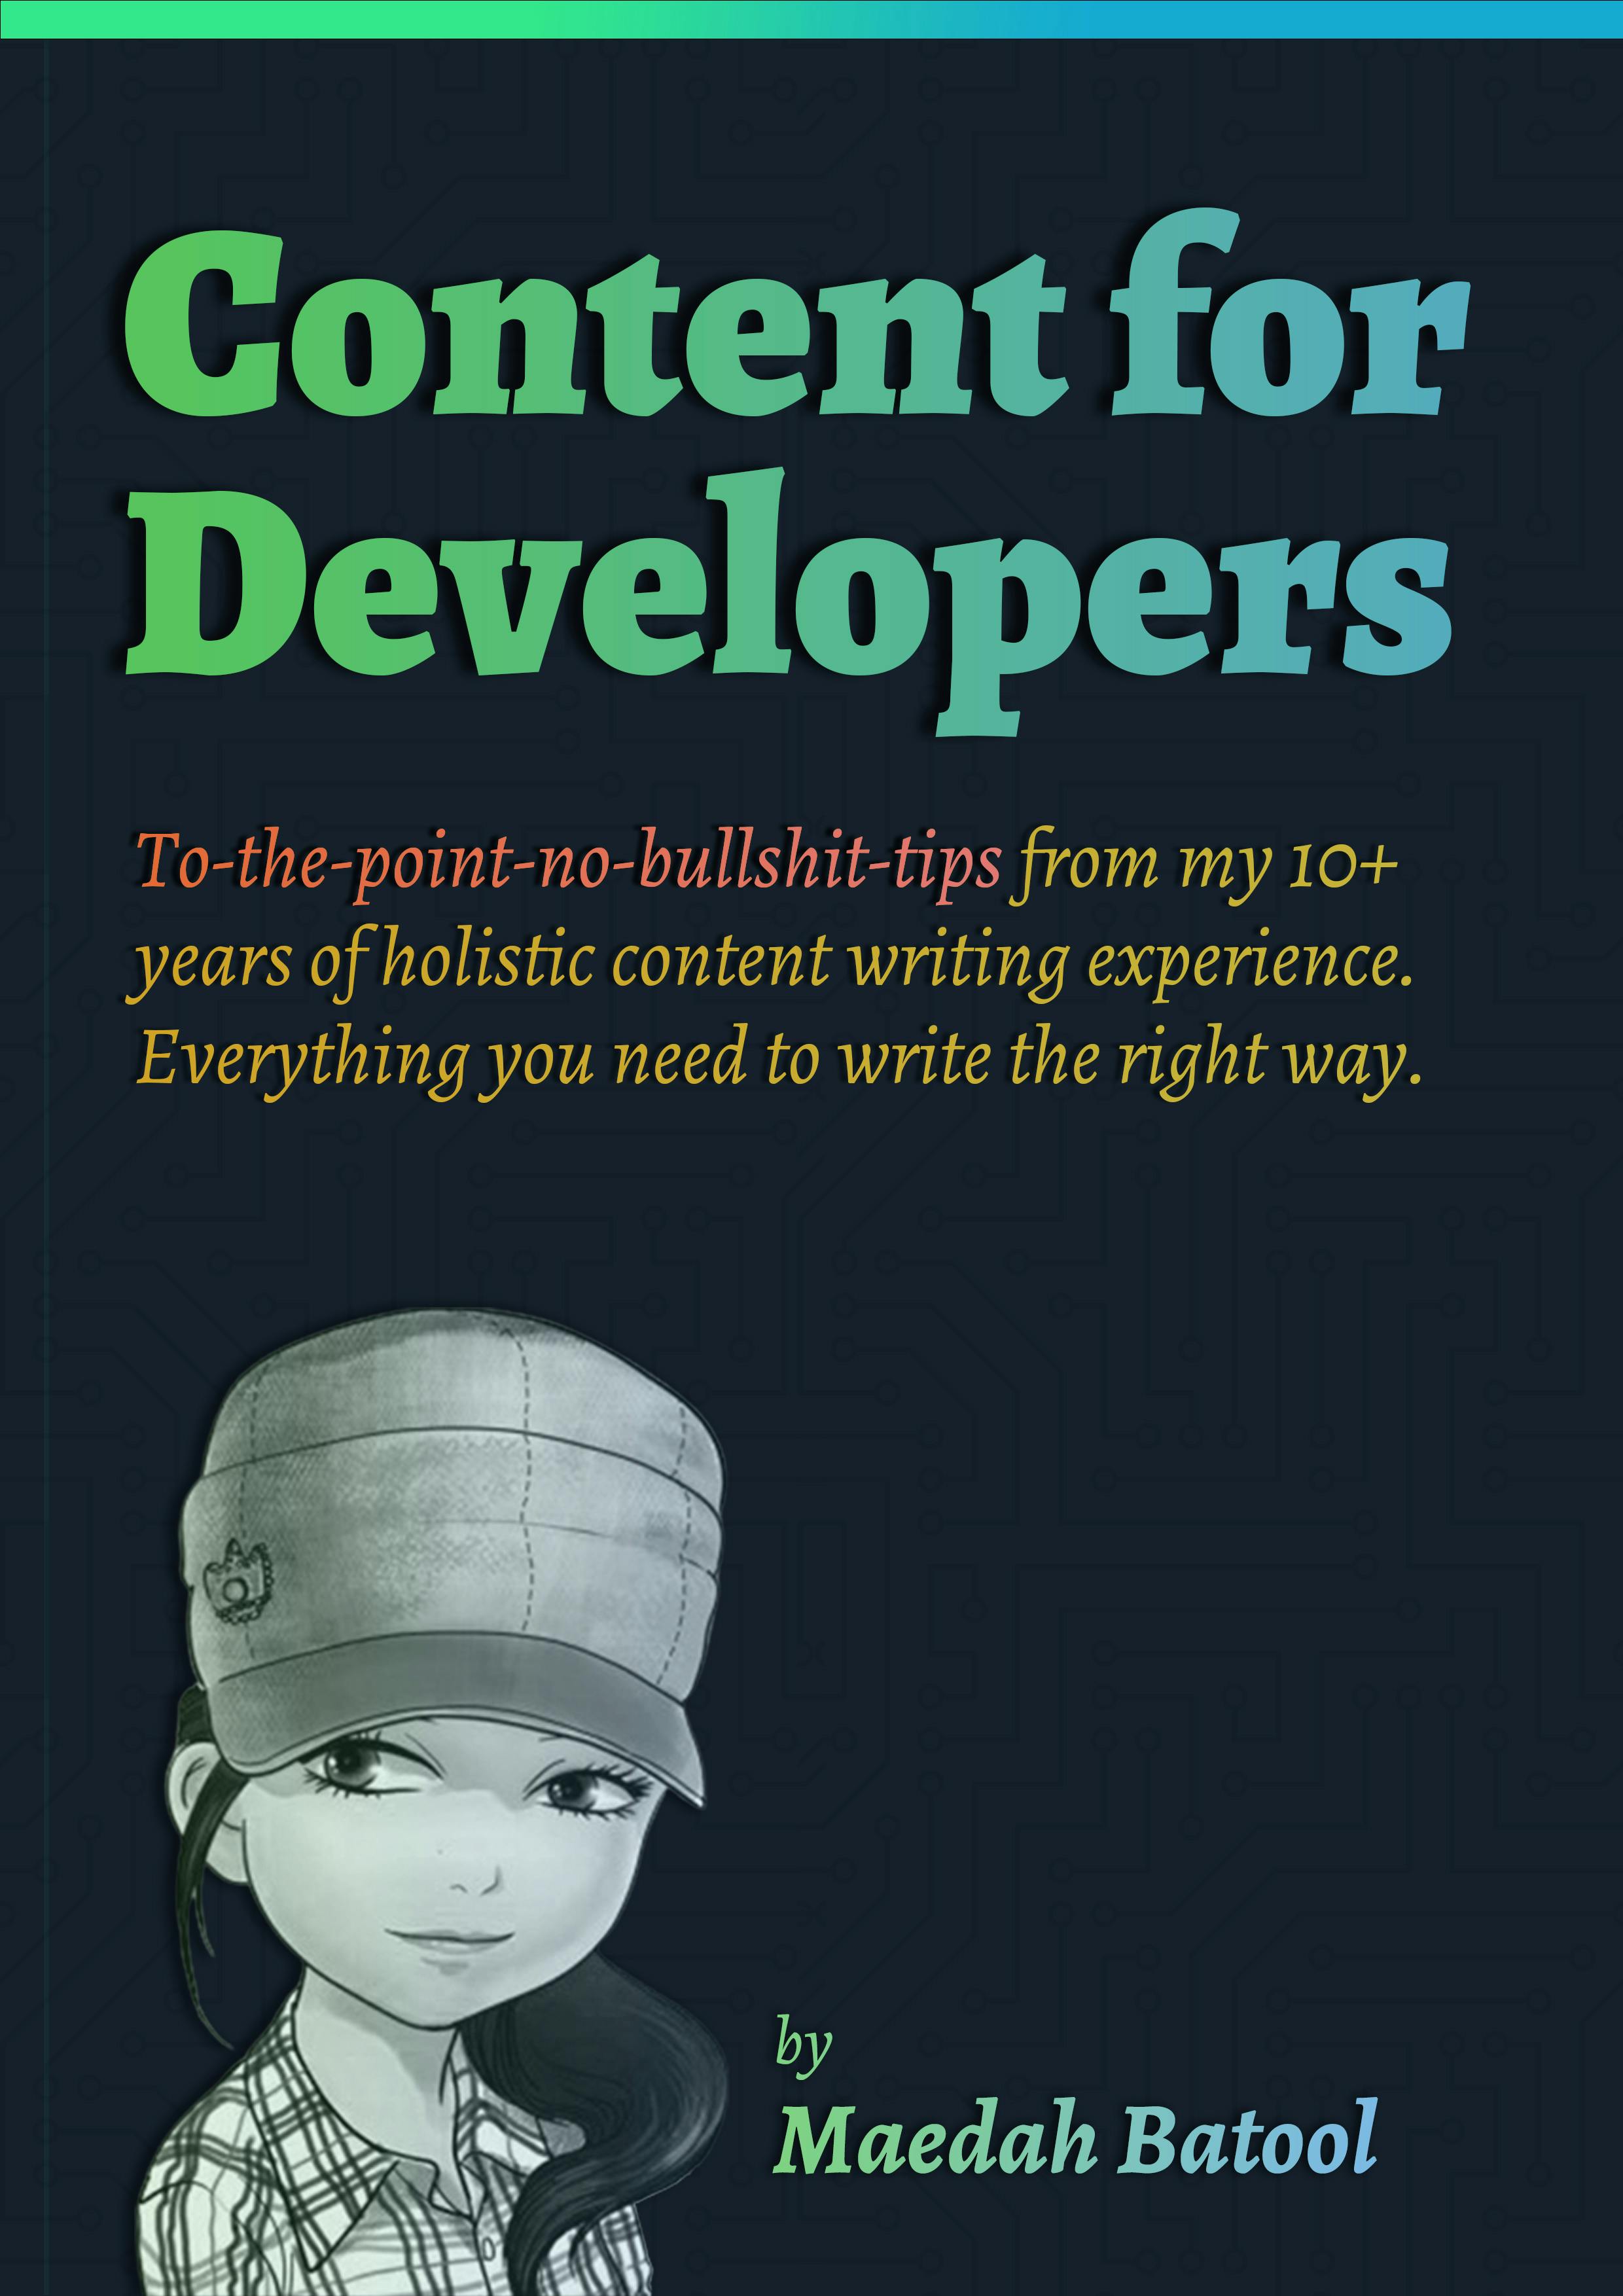 content-for-developers.jpg